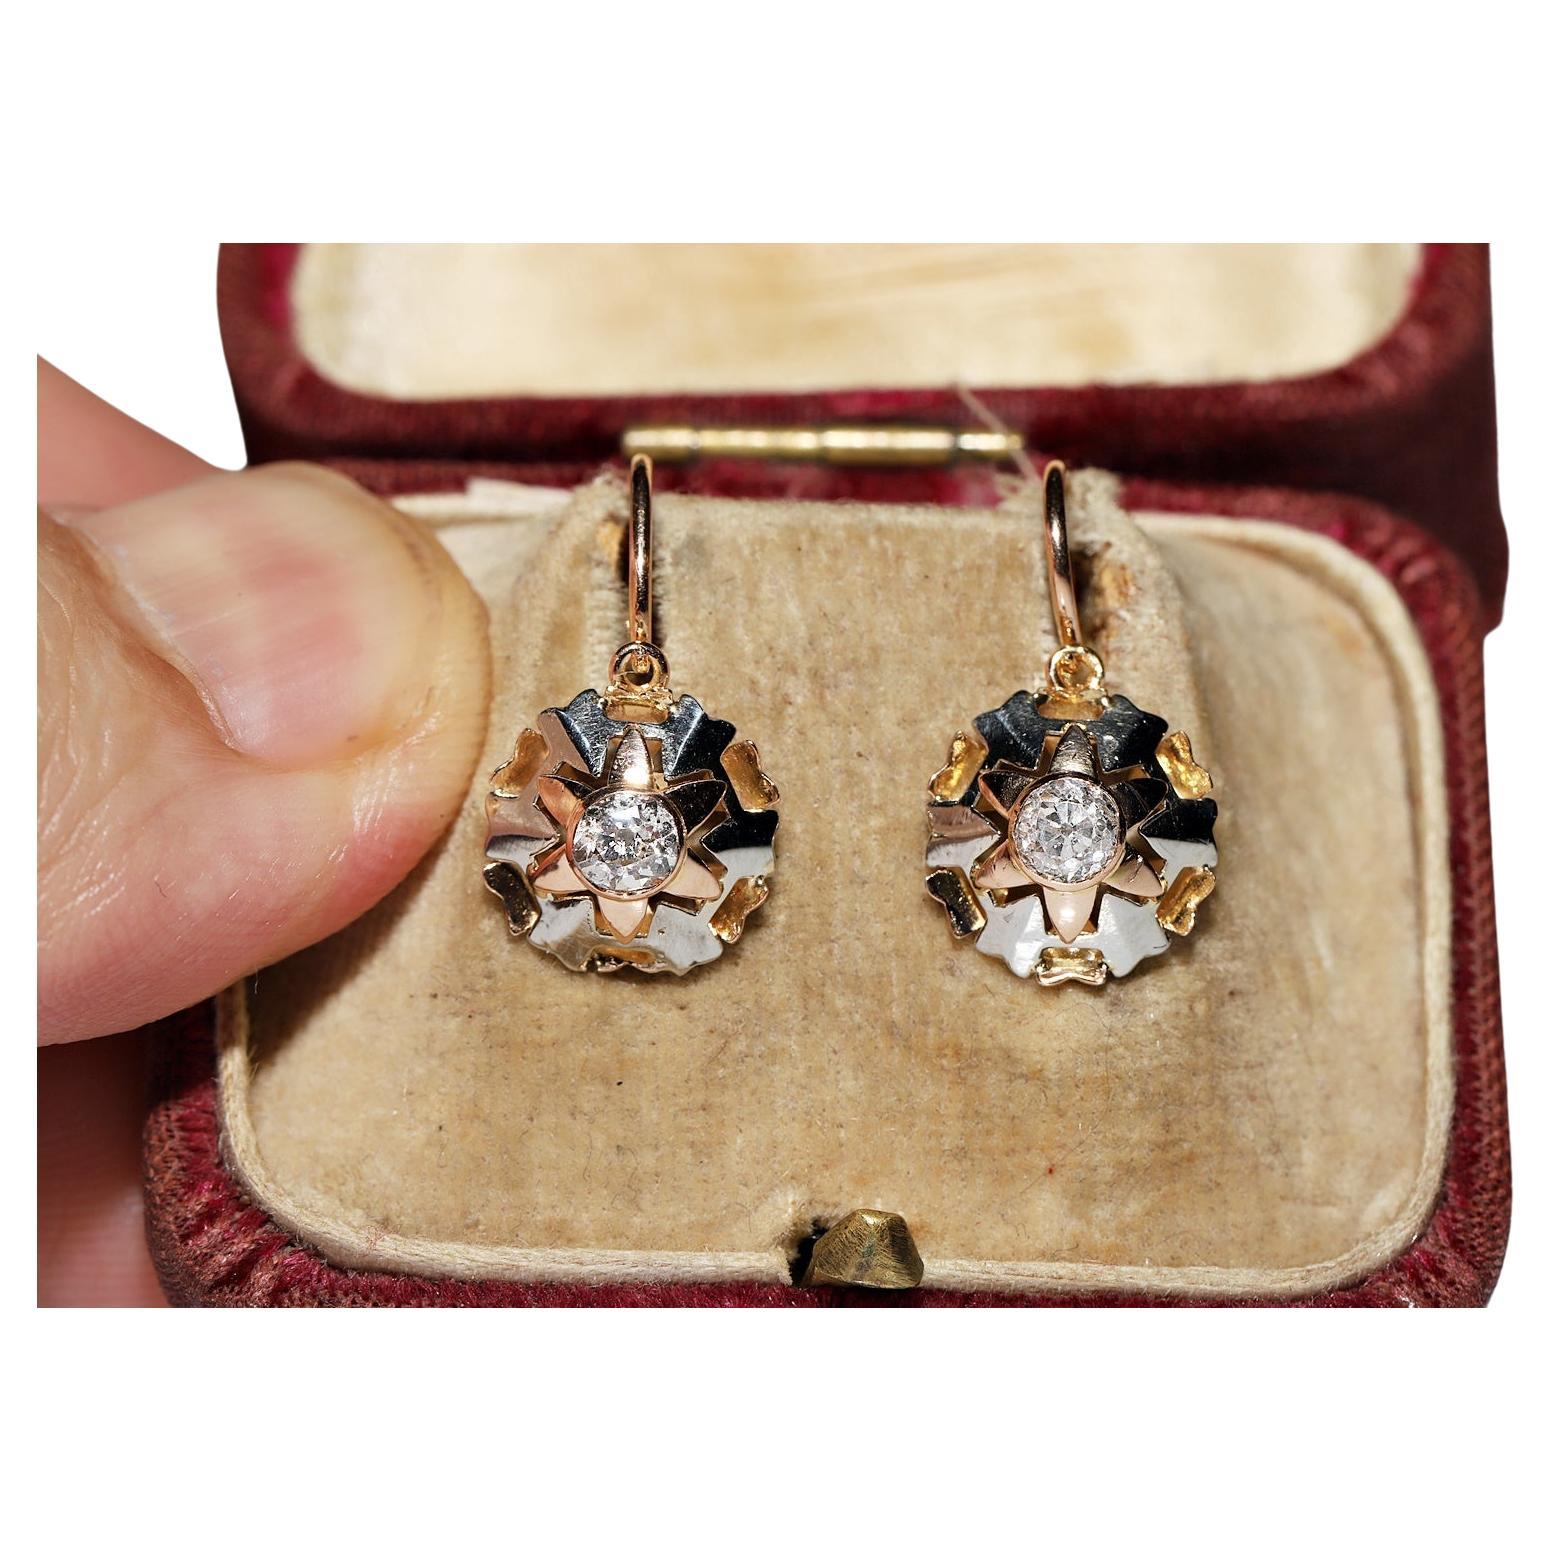 Antique Circa 1900s 18k Gold Natural Old Mine Cut Diamond Solitaire Earring 